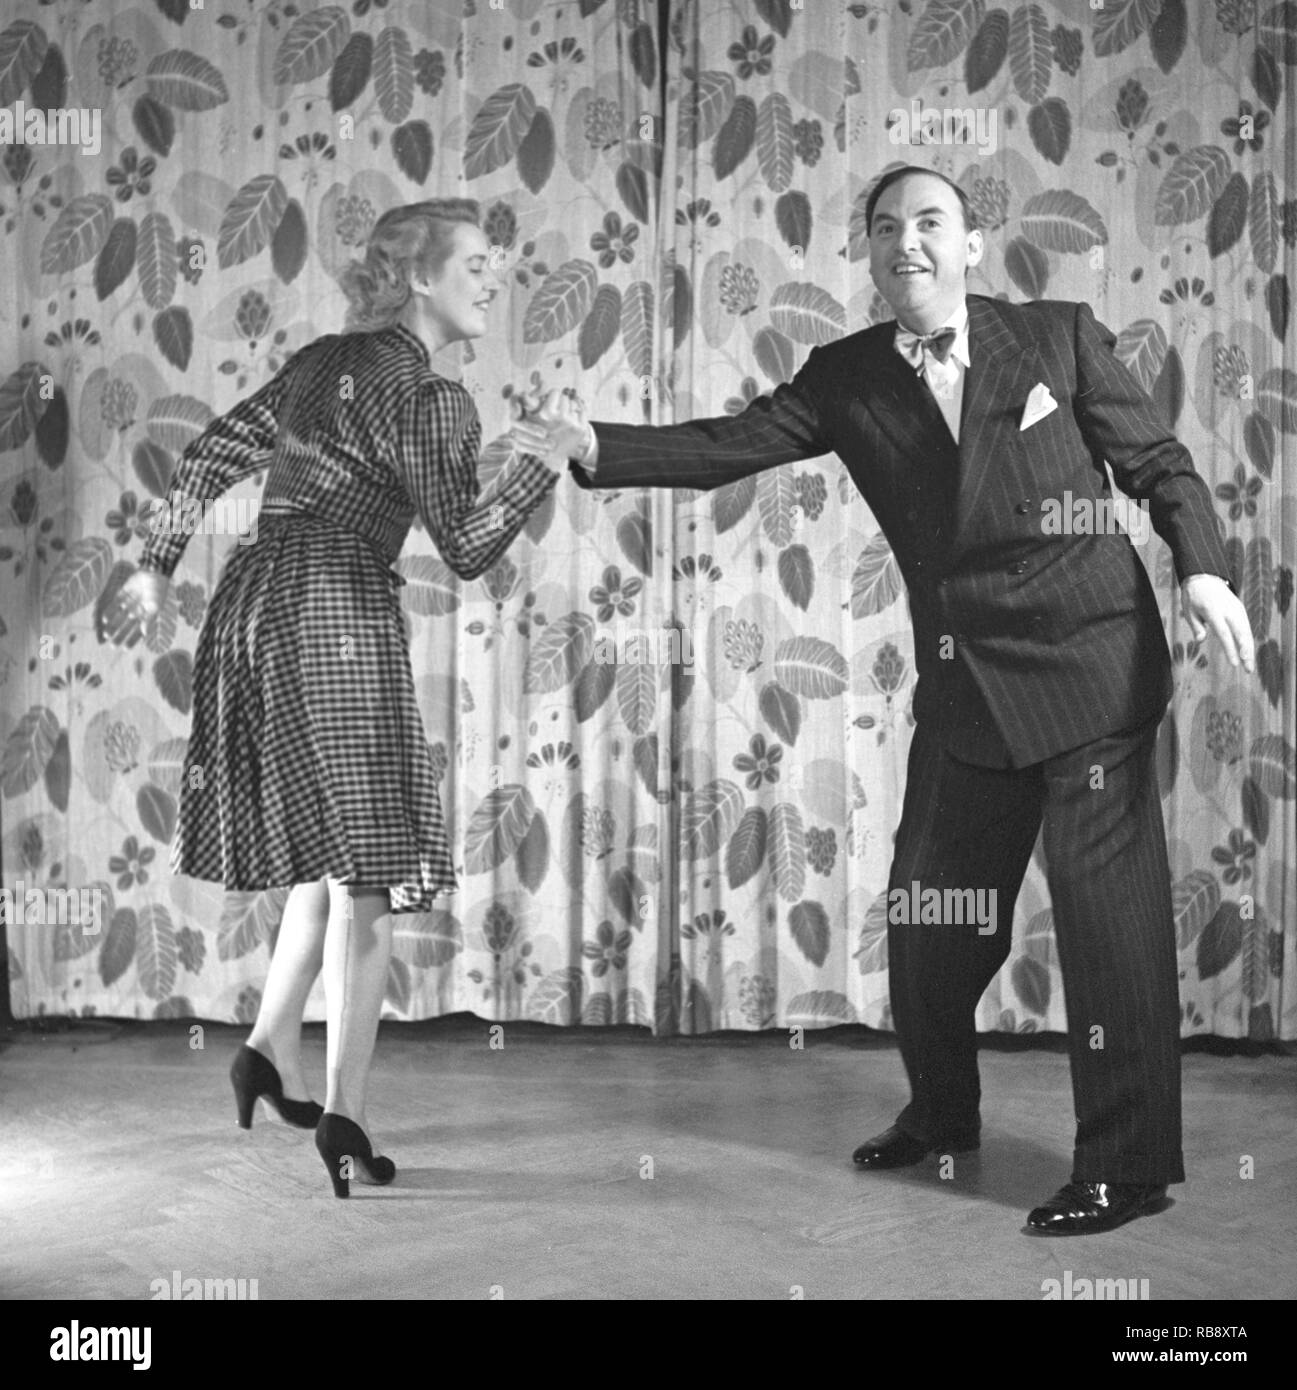 Learning to dance in the 1940s. A couple is dancing together. An instructiv image on how to position and move to the music, although which dance they are dancing is not known. Sweden 1946. Photo: Kristoffersson ref Y56-3 Stock Photo